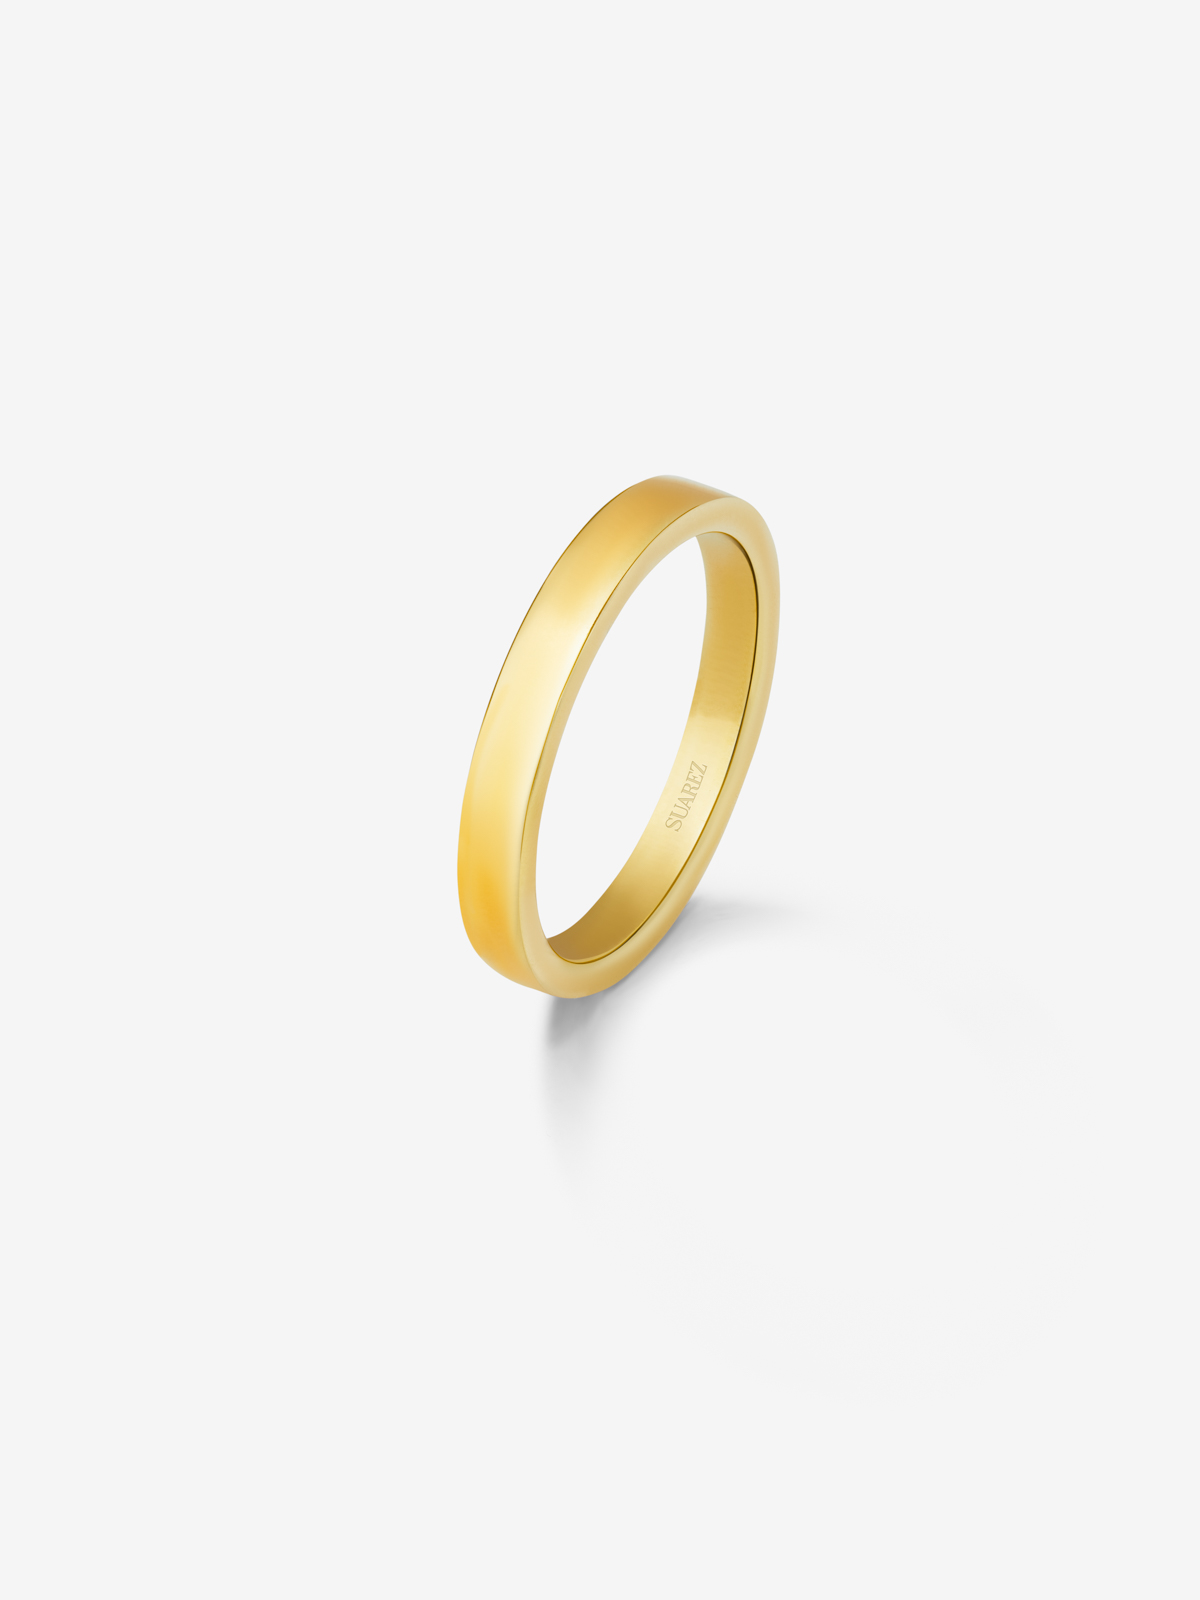 18K 1.85mm yellow flat compromise ring